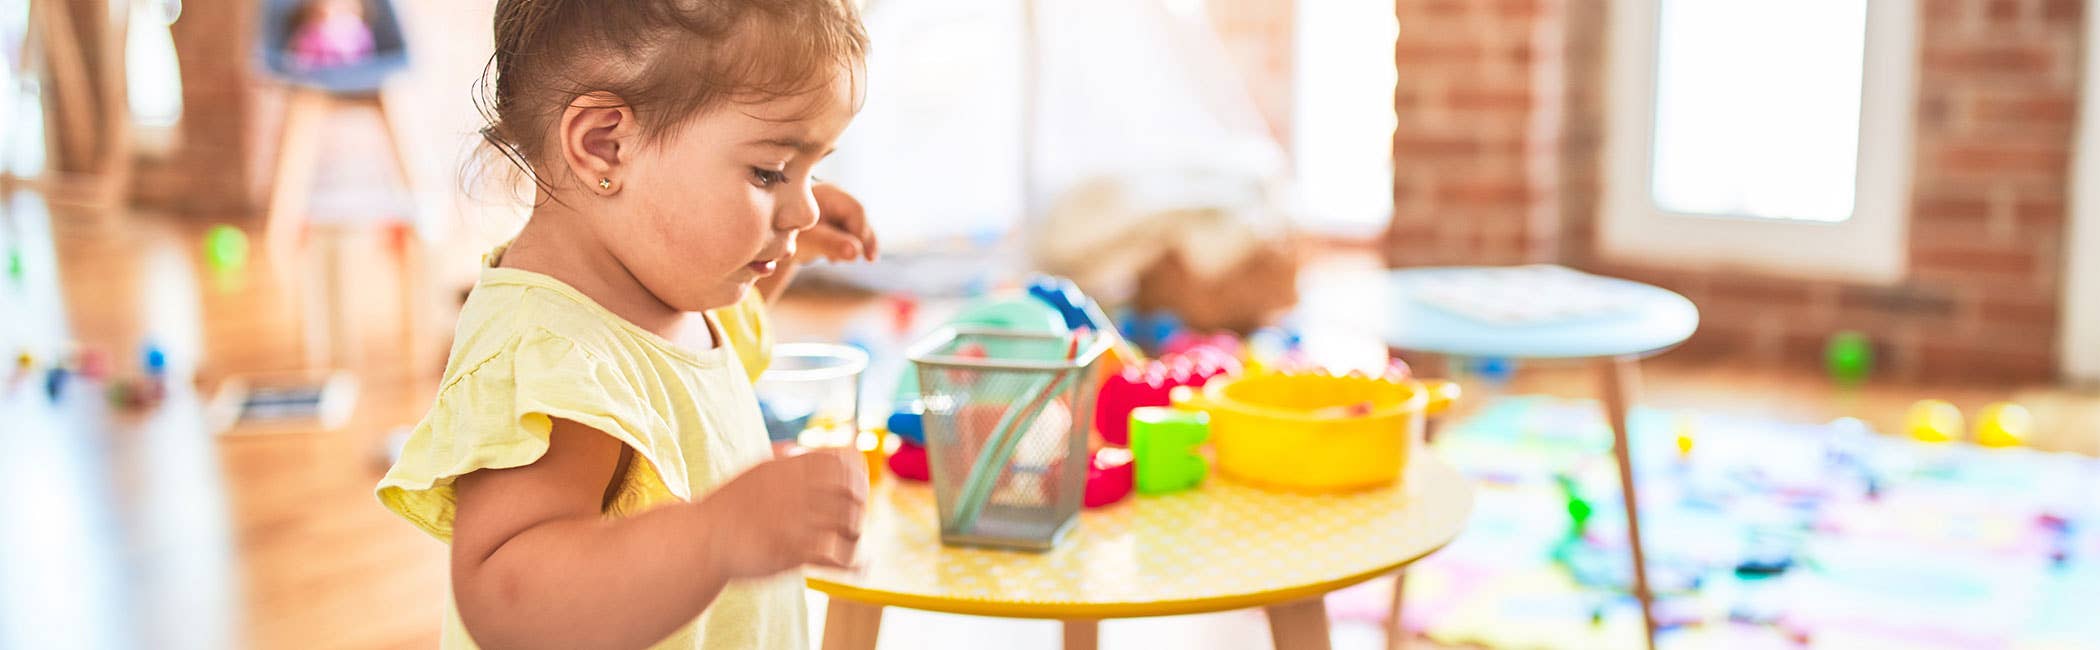 What Are the 5 Best Qualities of a Daycare Teacher? - The Breakie